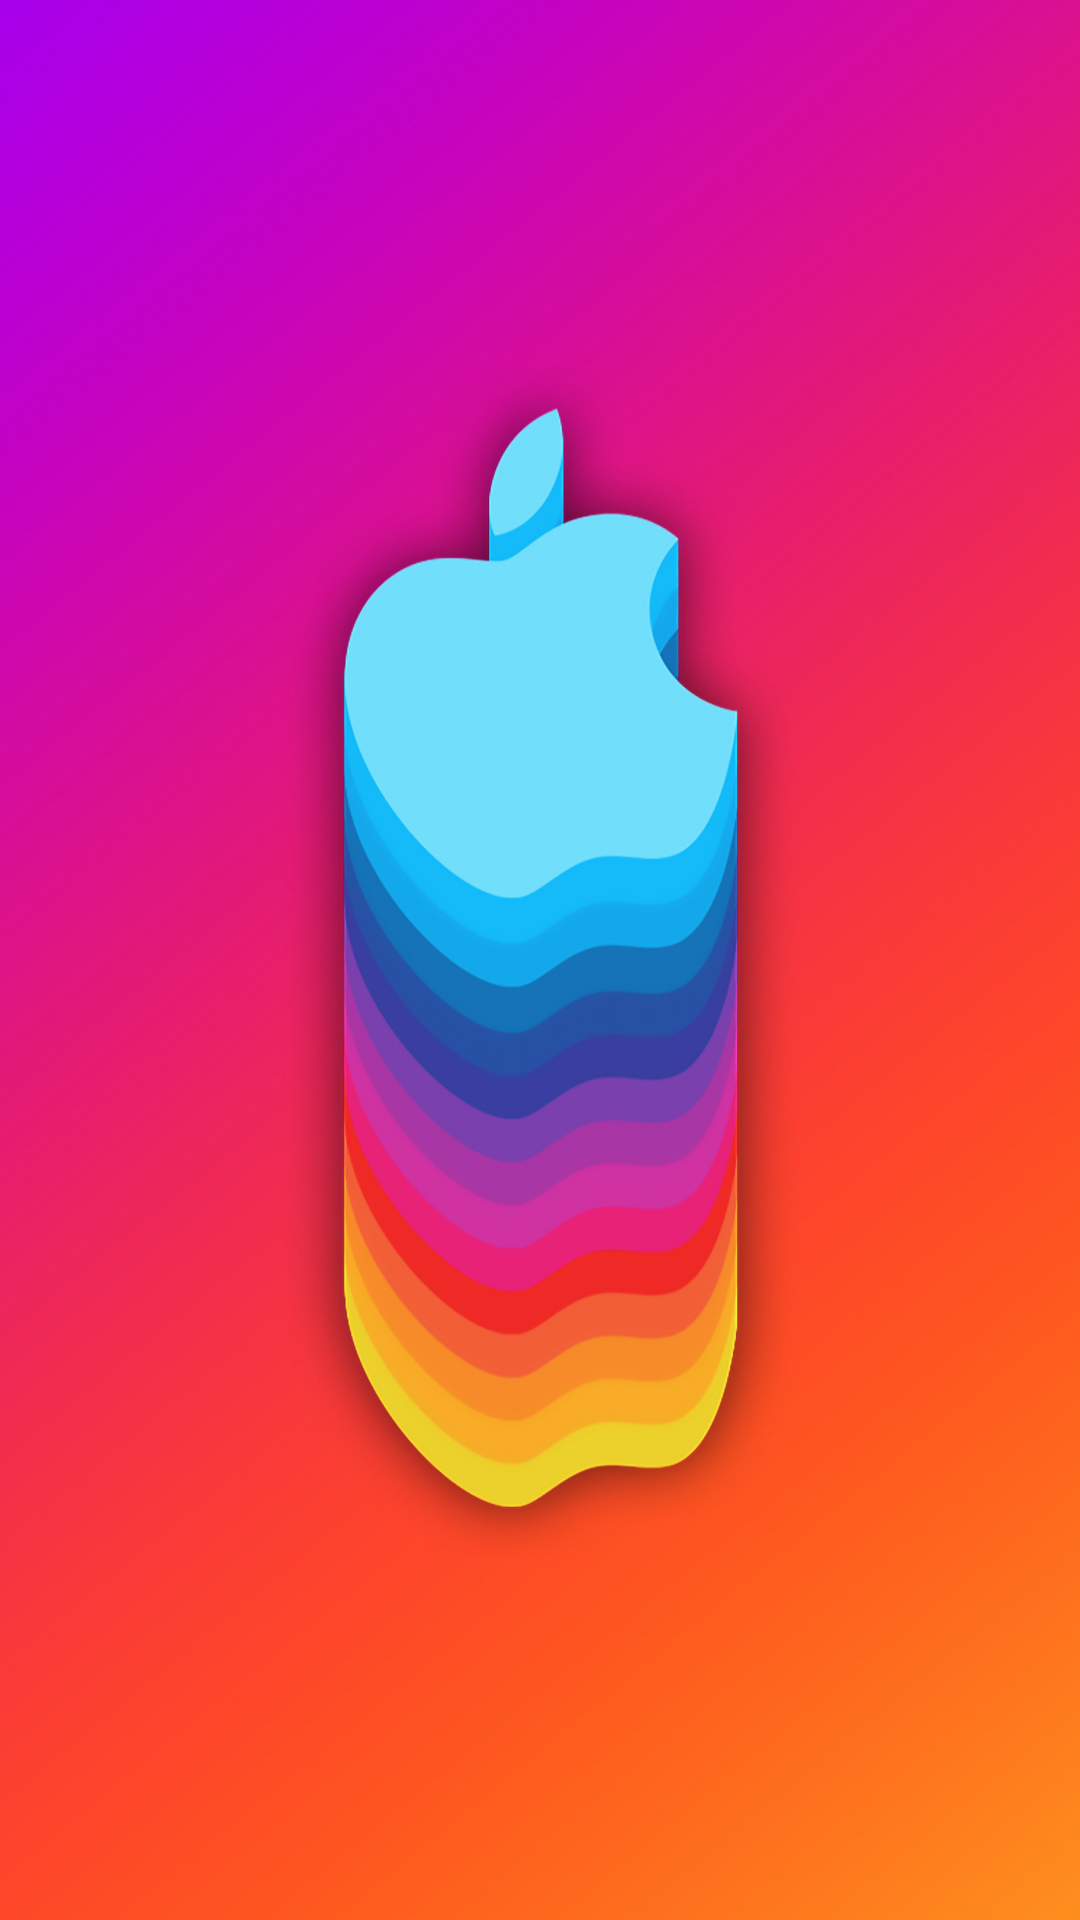 Download wallpaper 1080x1920 apple's logo, material art, abstract, 1080p  wallpaper, samsung galaxy s4, s5, note, sony xperia z, z1, z2, z3, htc one,  lenovo vibe, google pixel 2, oneplus 5, honor 9,